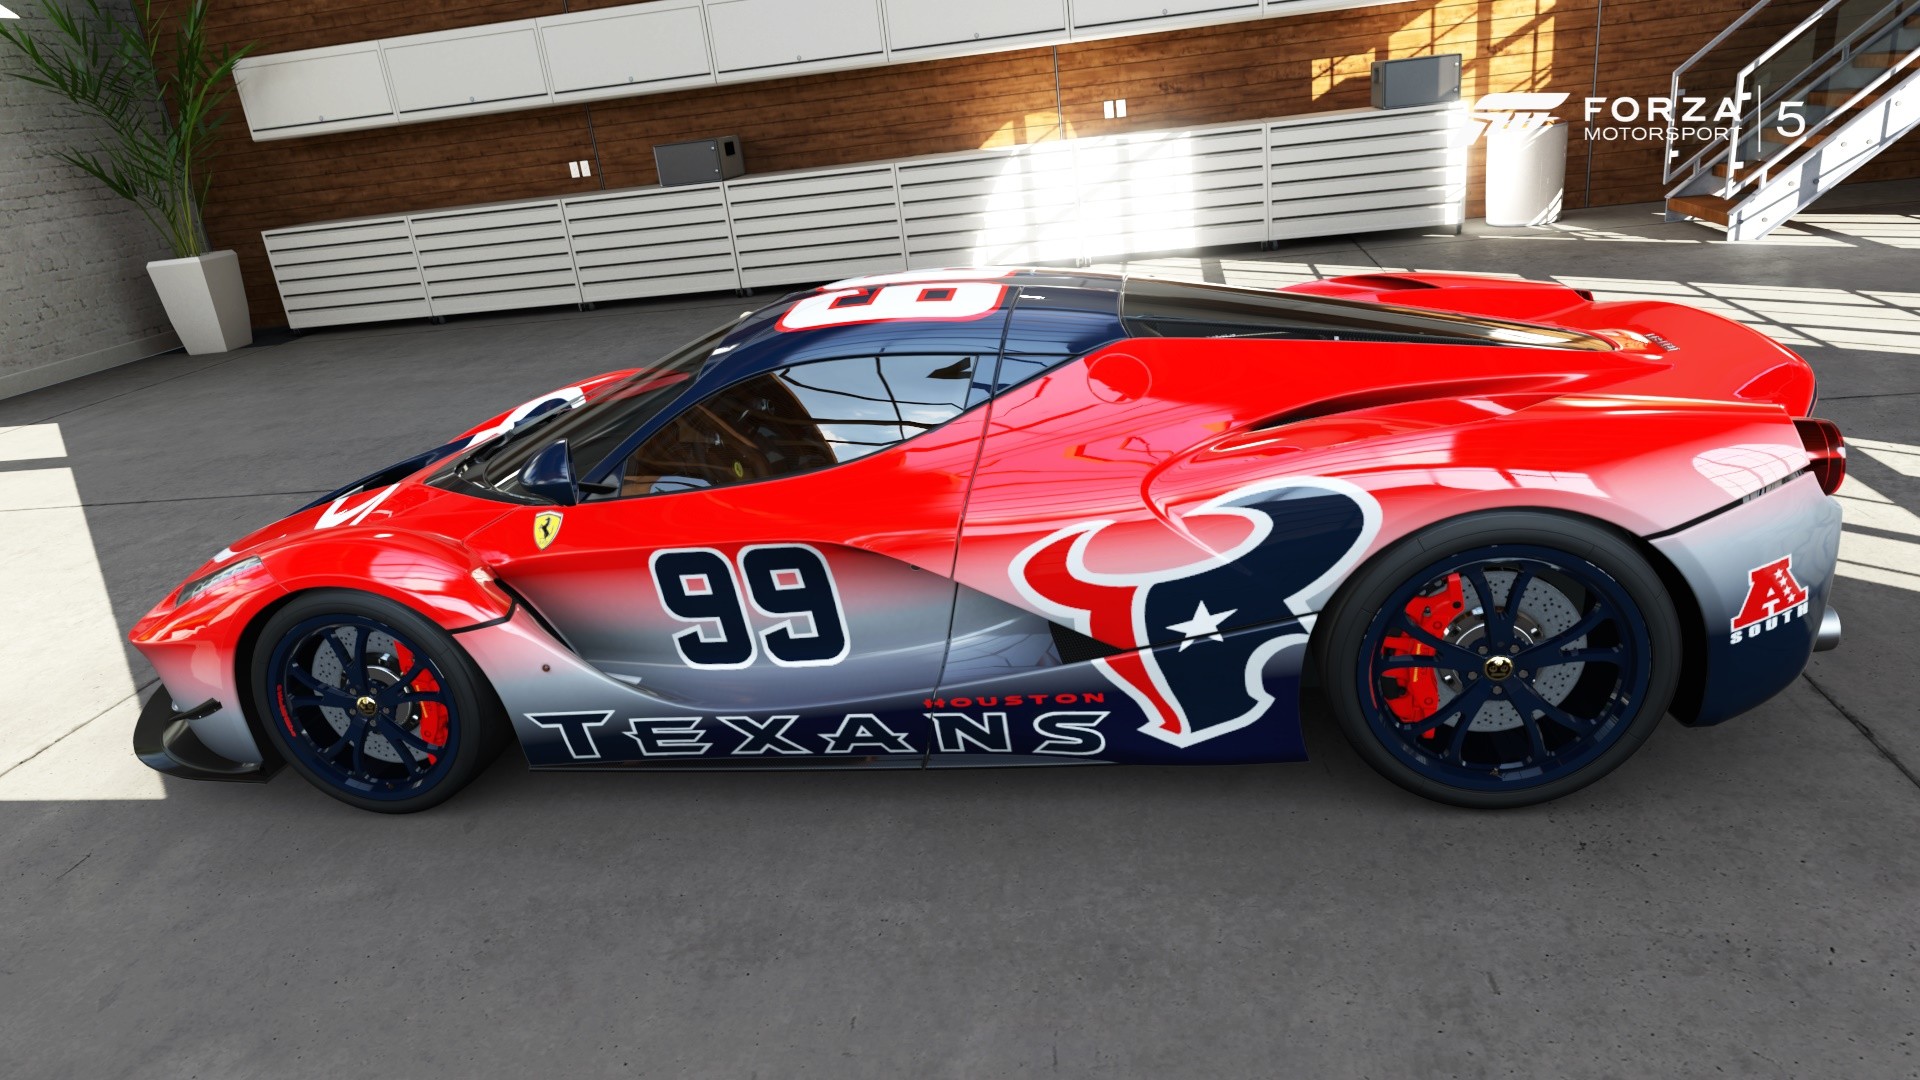 1920x1080 EVS Motors has rendered a Ferrari LaFerrari with the Houston Texans livery  specifically for JJ Watt.